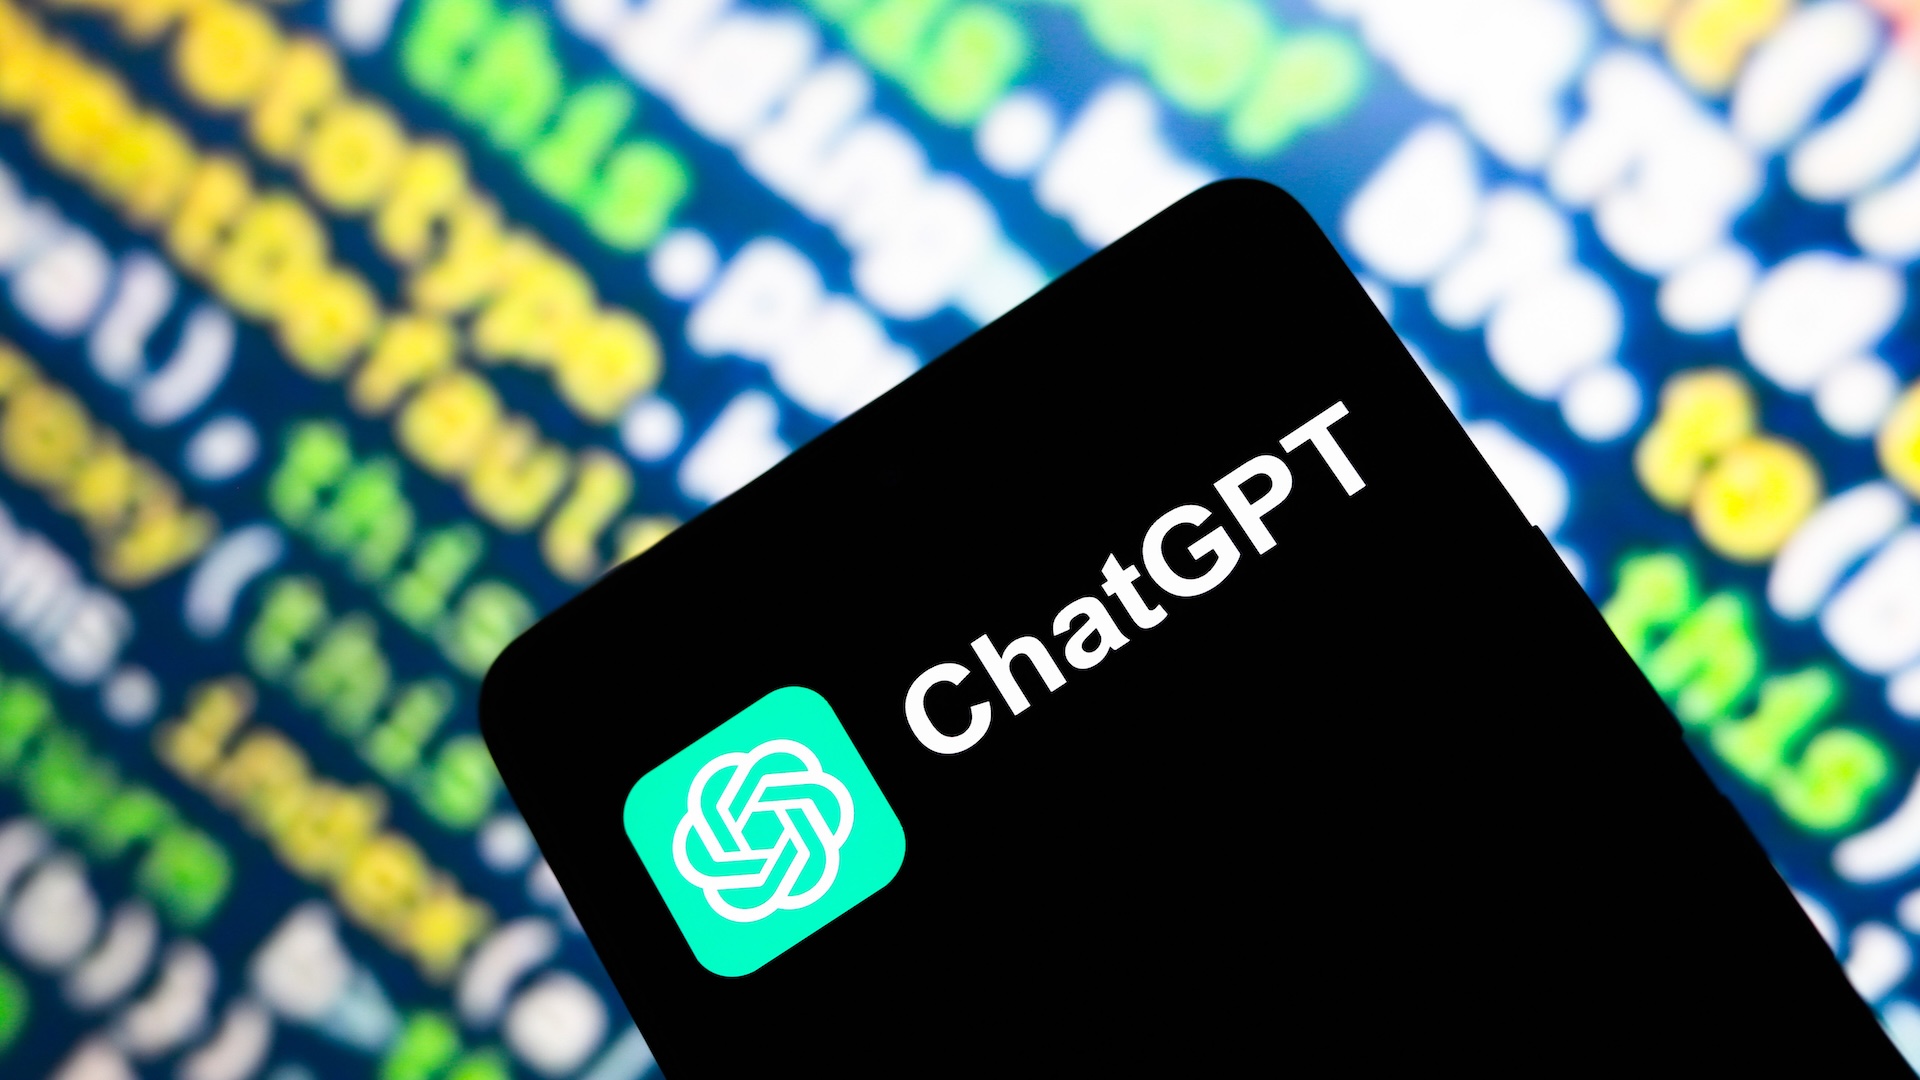 The ChatGPT logo displayed on a phone screen